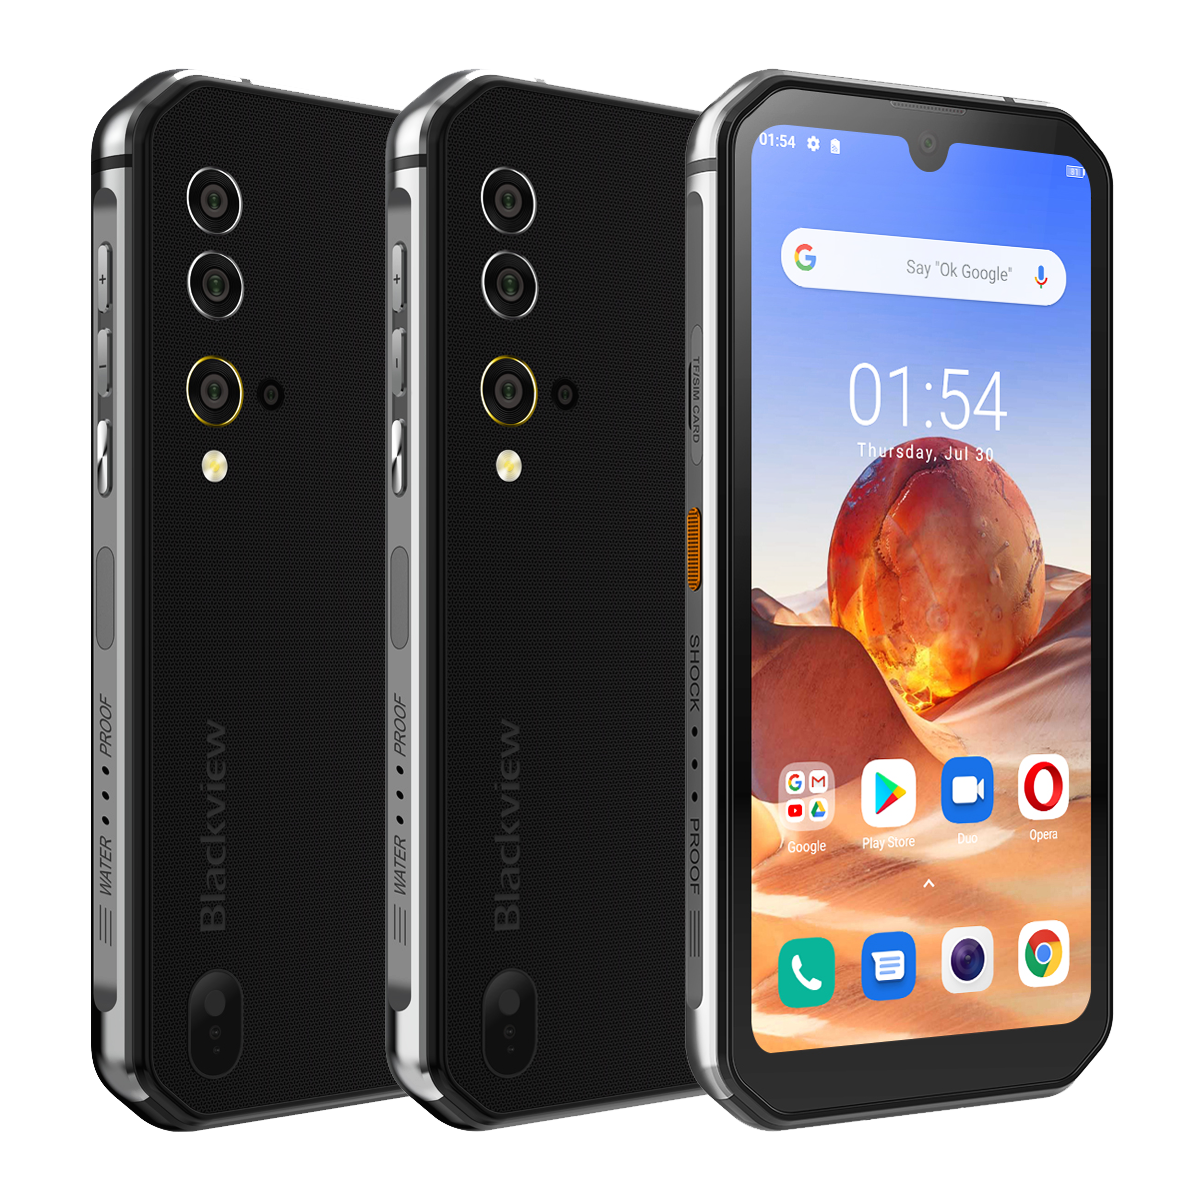 Find Blackview BV9900E Global Bands IP68/IP69K 5 84 inch FHD NFC Android 10 4380mAh 48MP Quad Rear Camera 6GB 128GB Helio P90 4G Smartphone for Sale on Gipsybee.com with cryptocurrencies